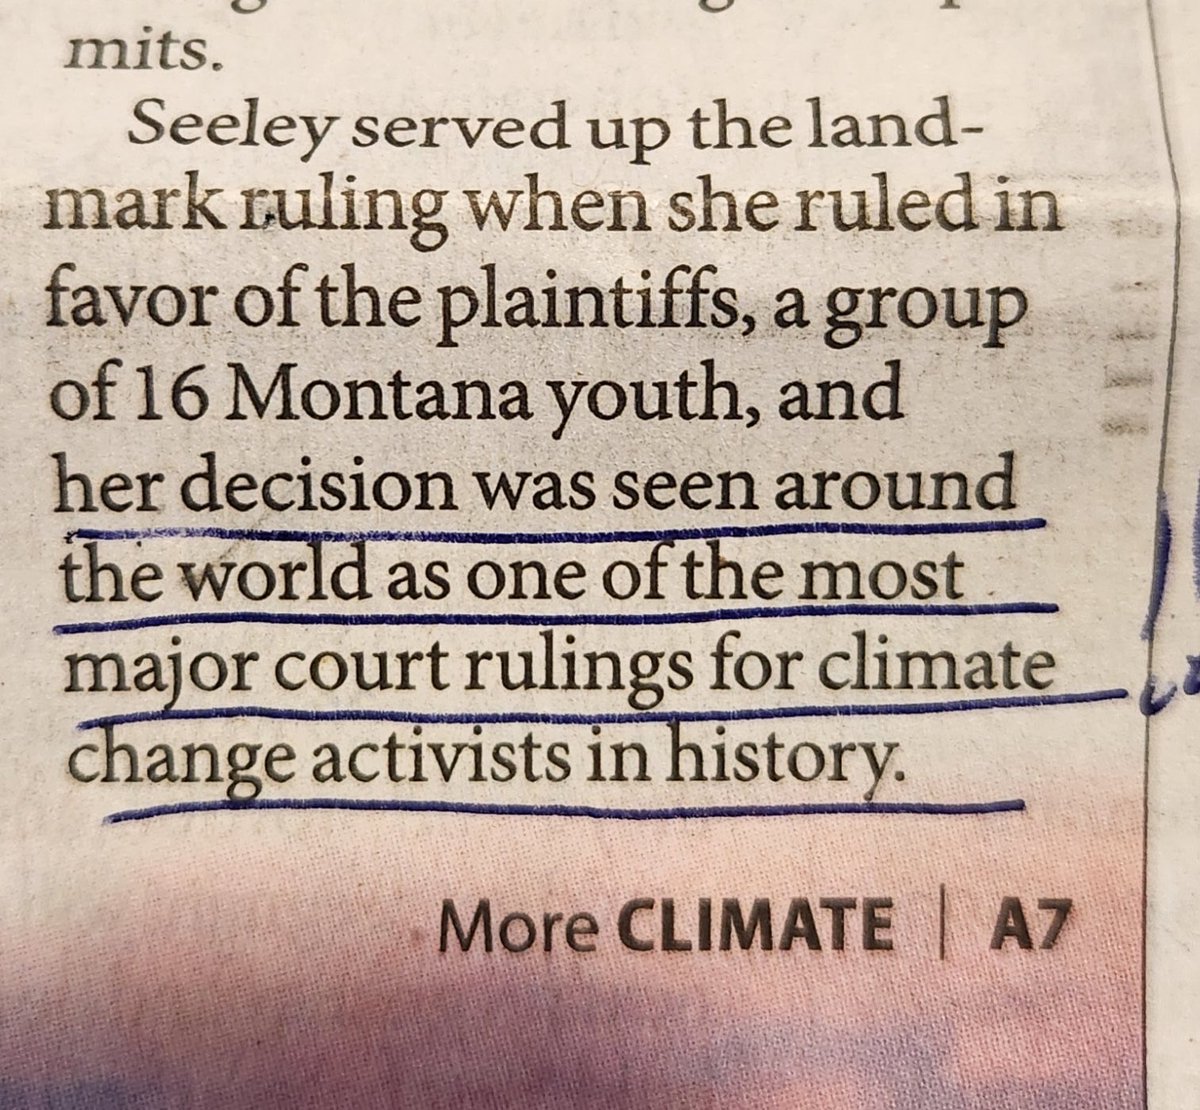 Our Montana kids are moving mountains. ⁦@westernlaw⁩ ⁦@youthvgov⁩ #heldmakeshistory #climateheroes #cleanairkids ⁦@Moms_Press⁩